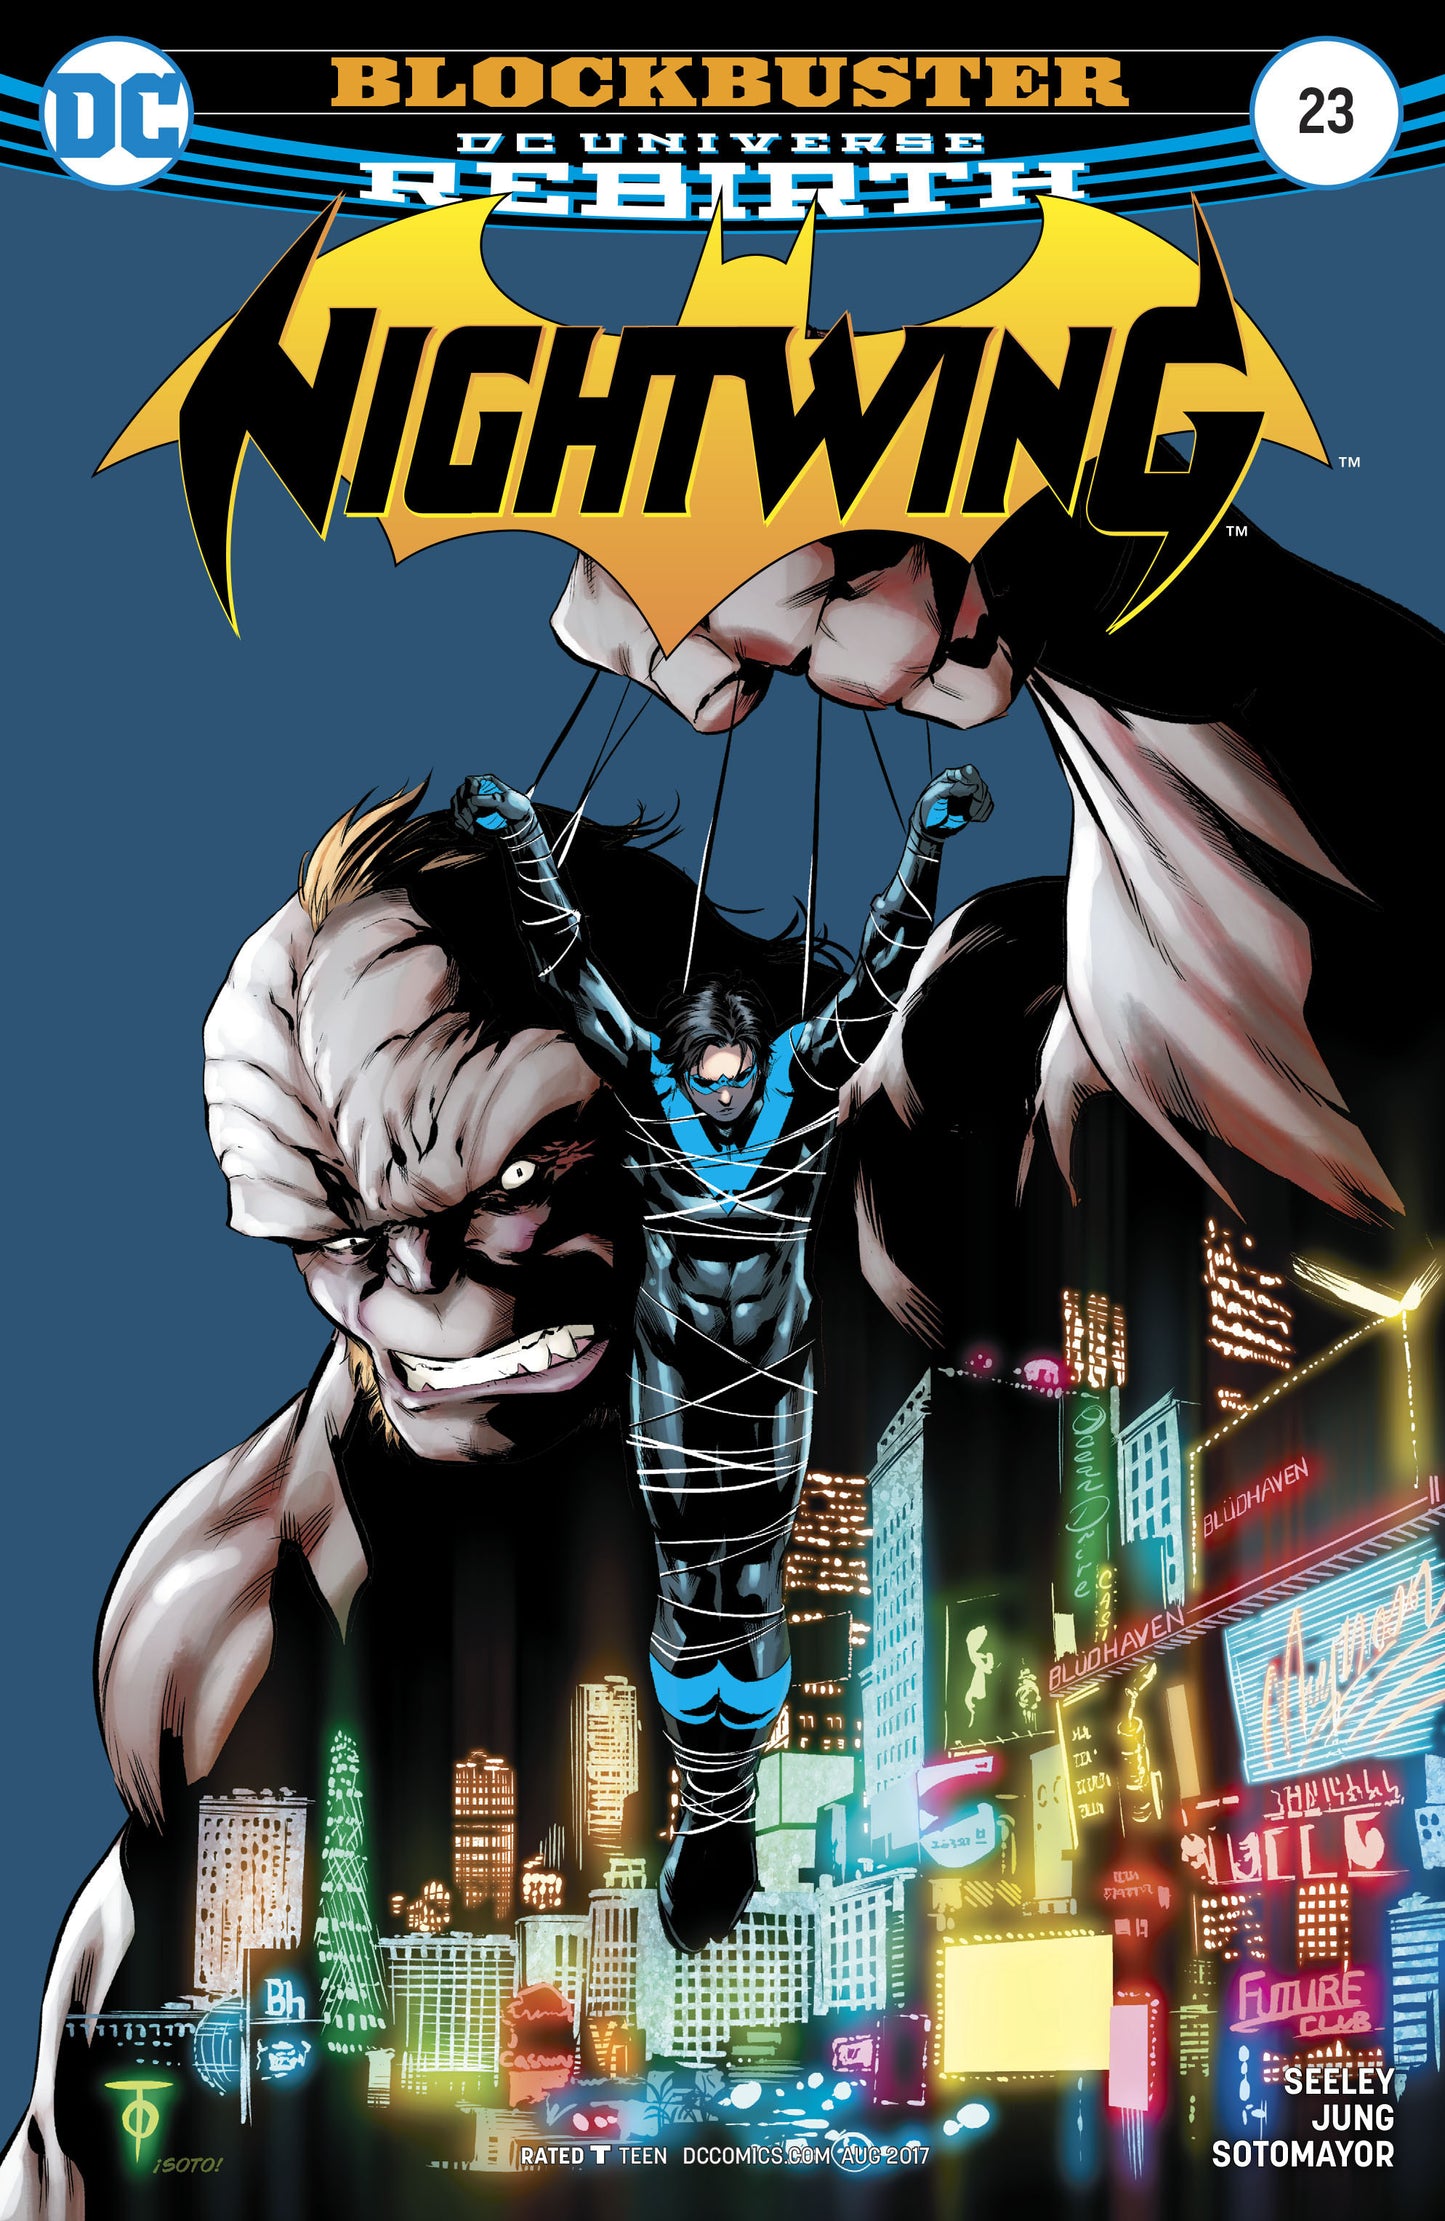 NIGHTWING #23 COVER